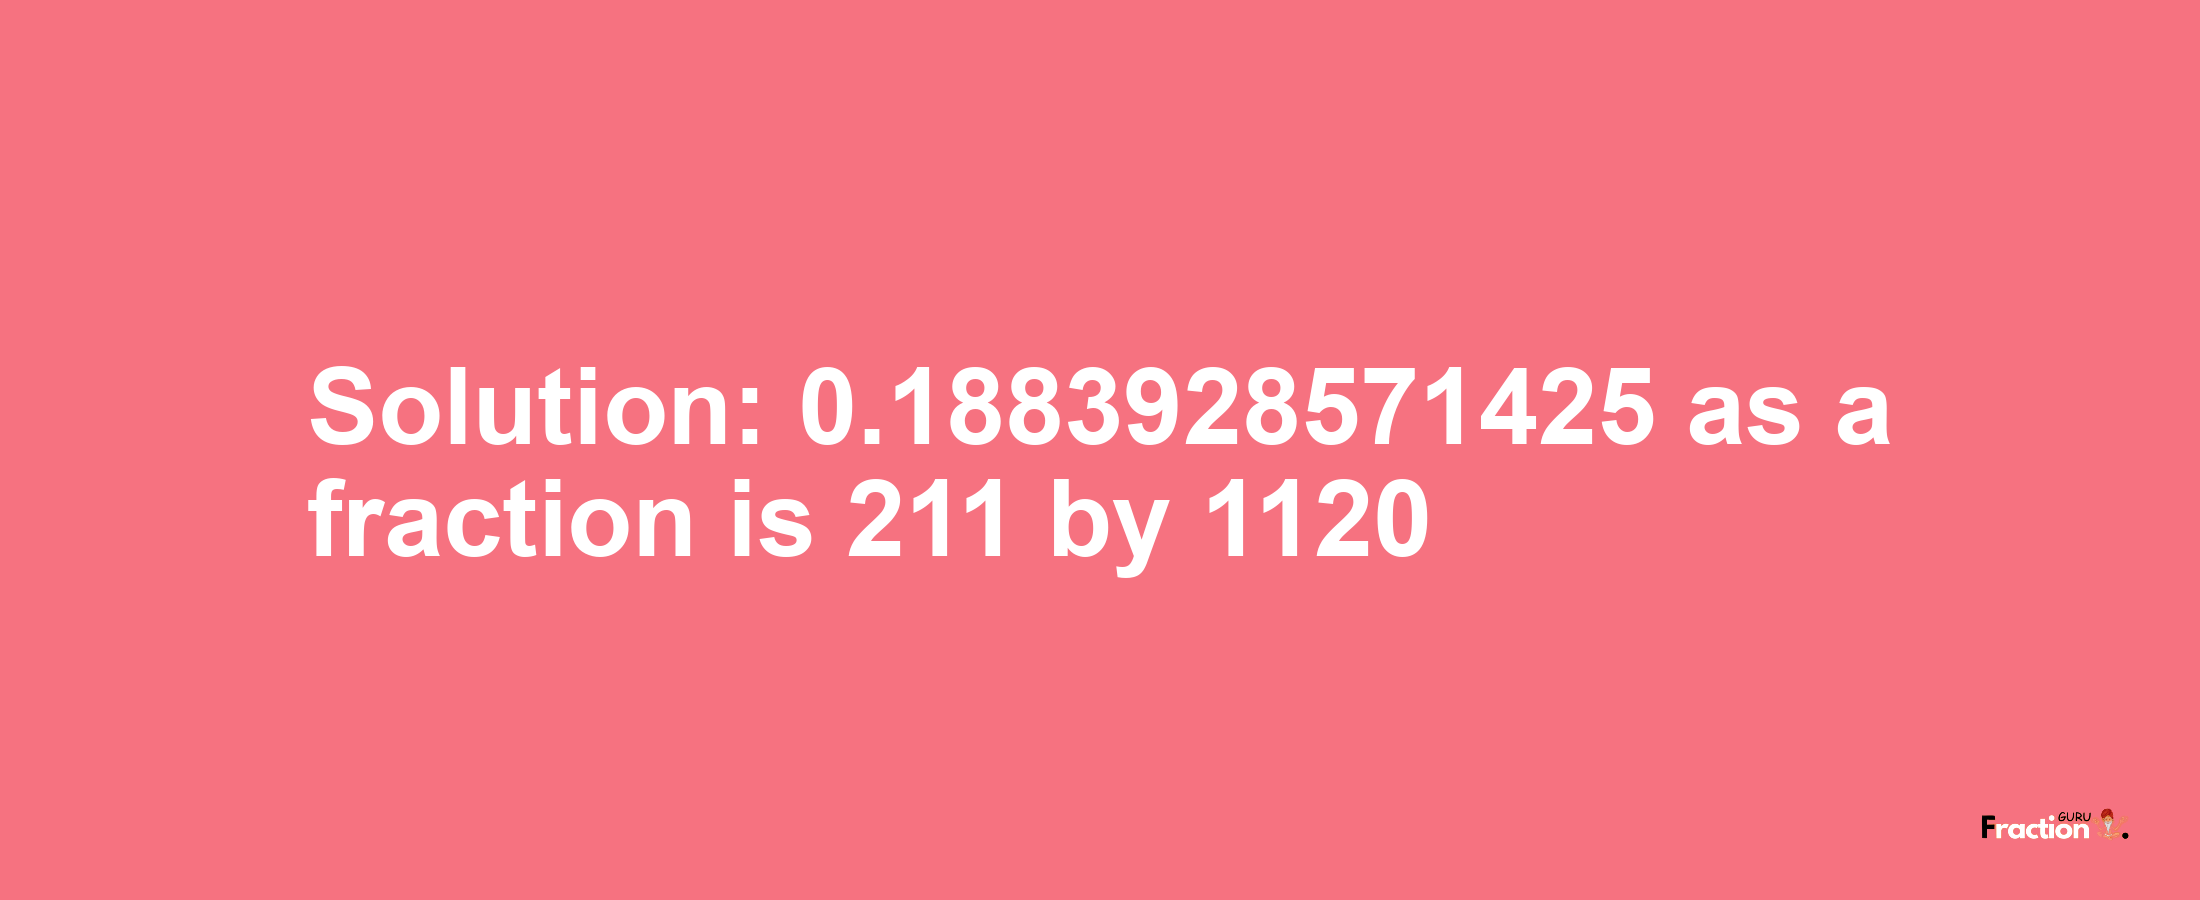 Solution:0.1883928571425 as a fraction is 211/1120